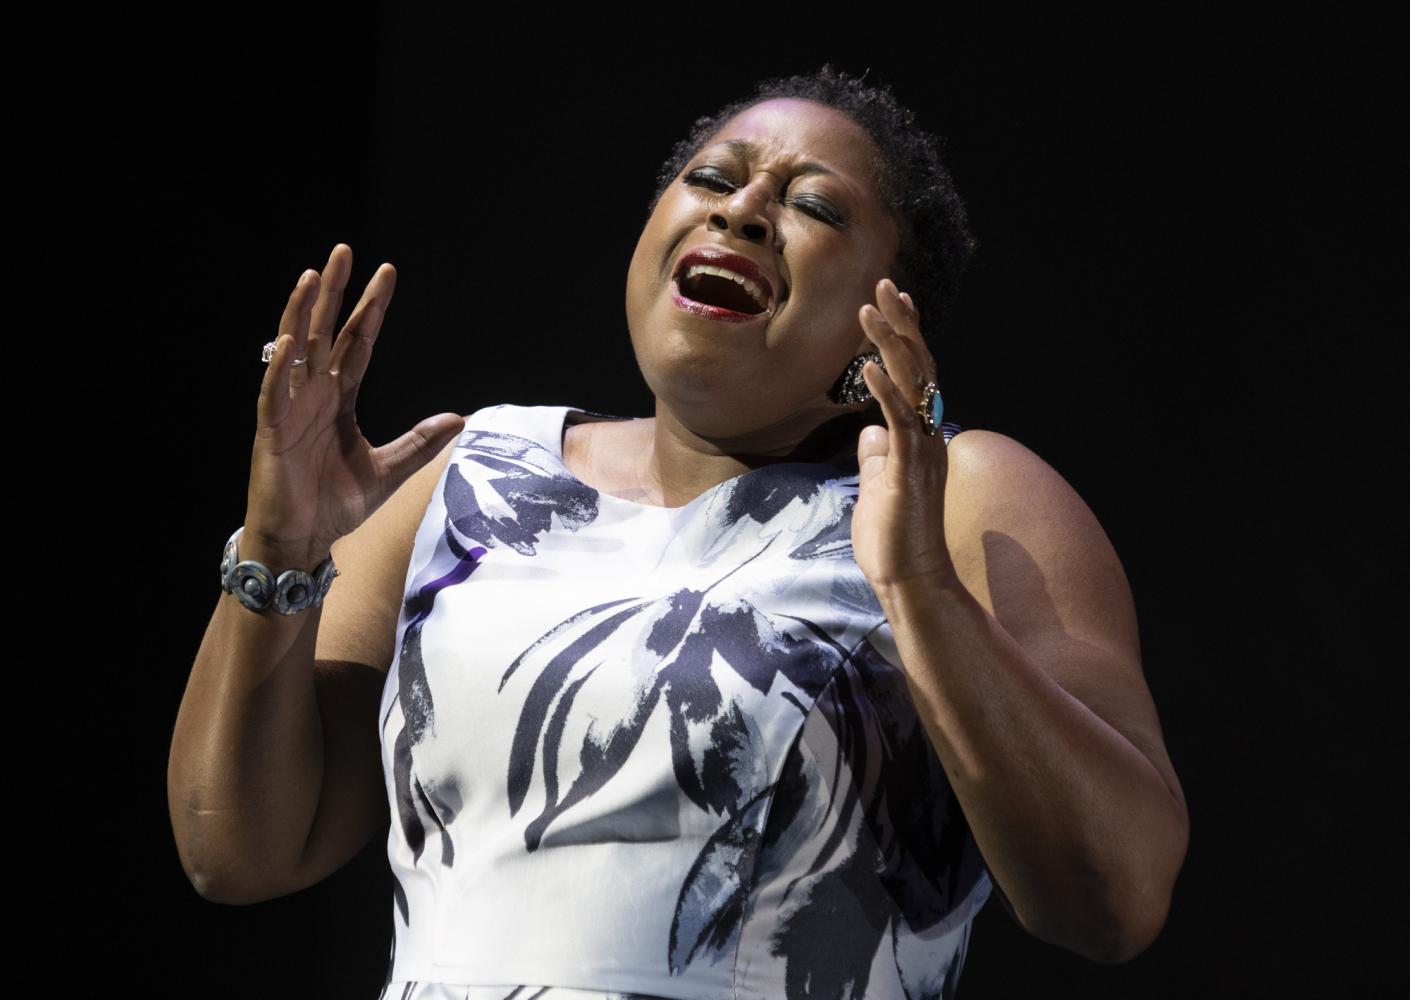 Alison Buchanan, black female opera singer, singing a song in a white and black dress